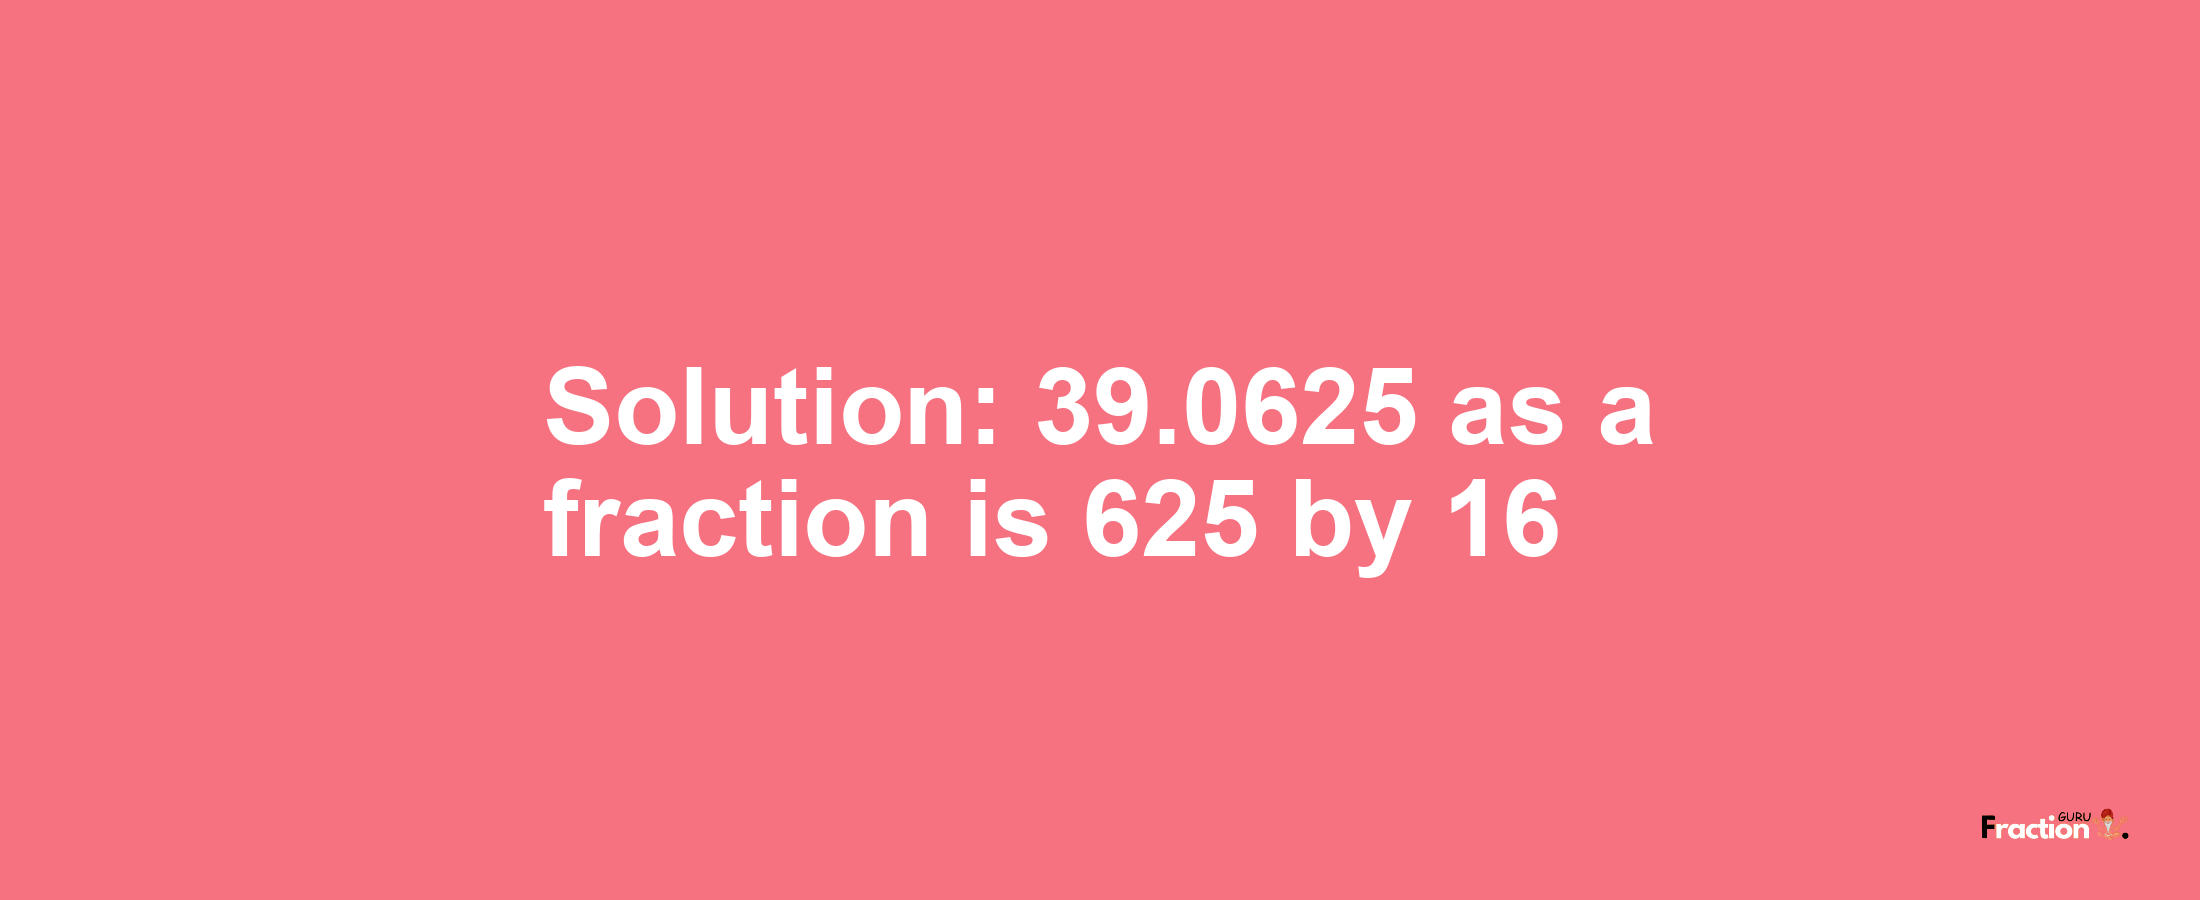 Solution:39.0625 as a fraction is 625/16